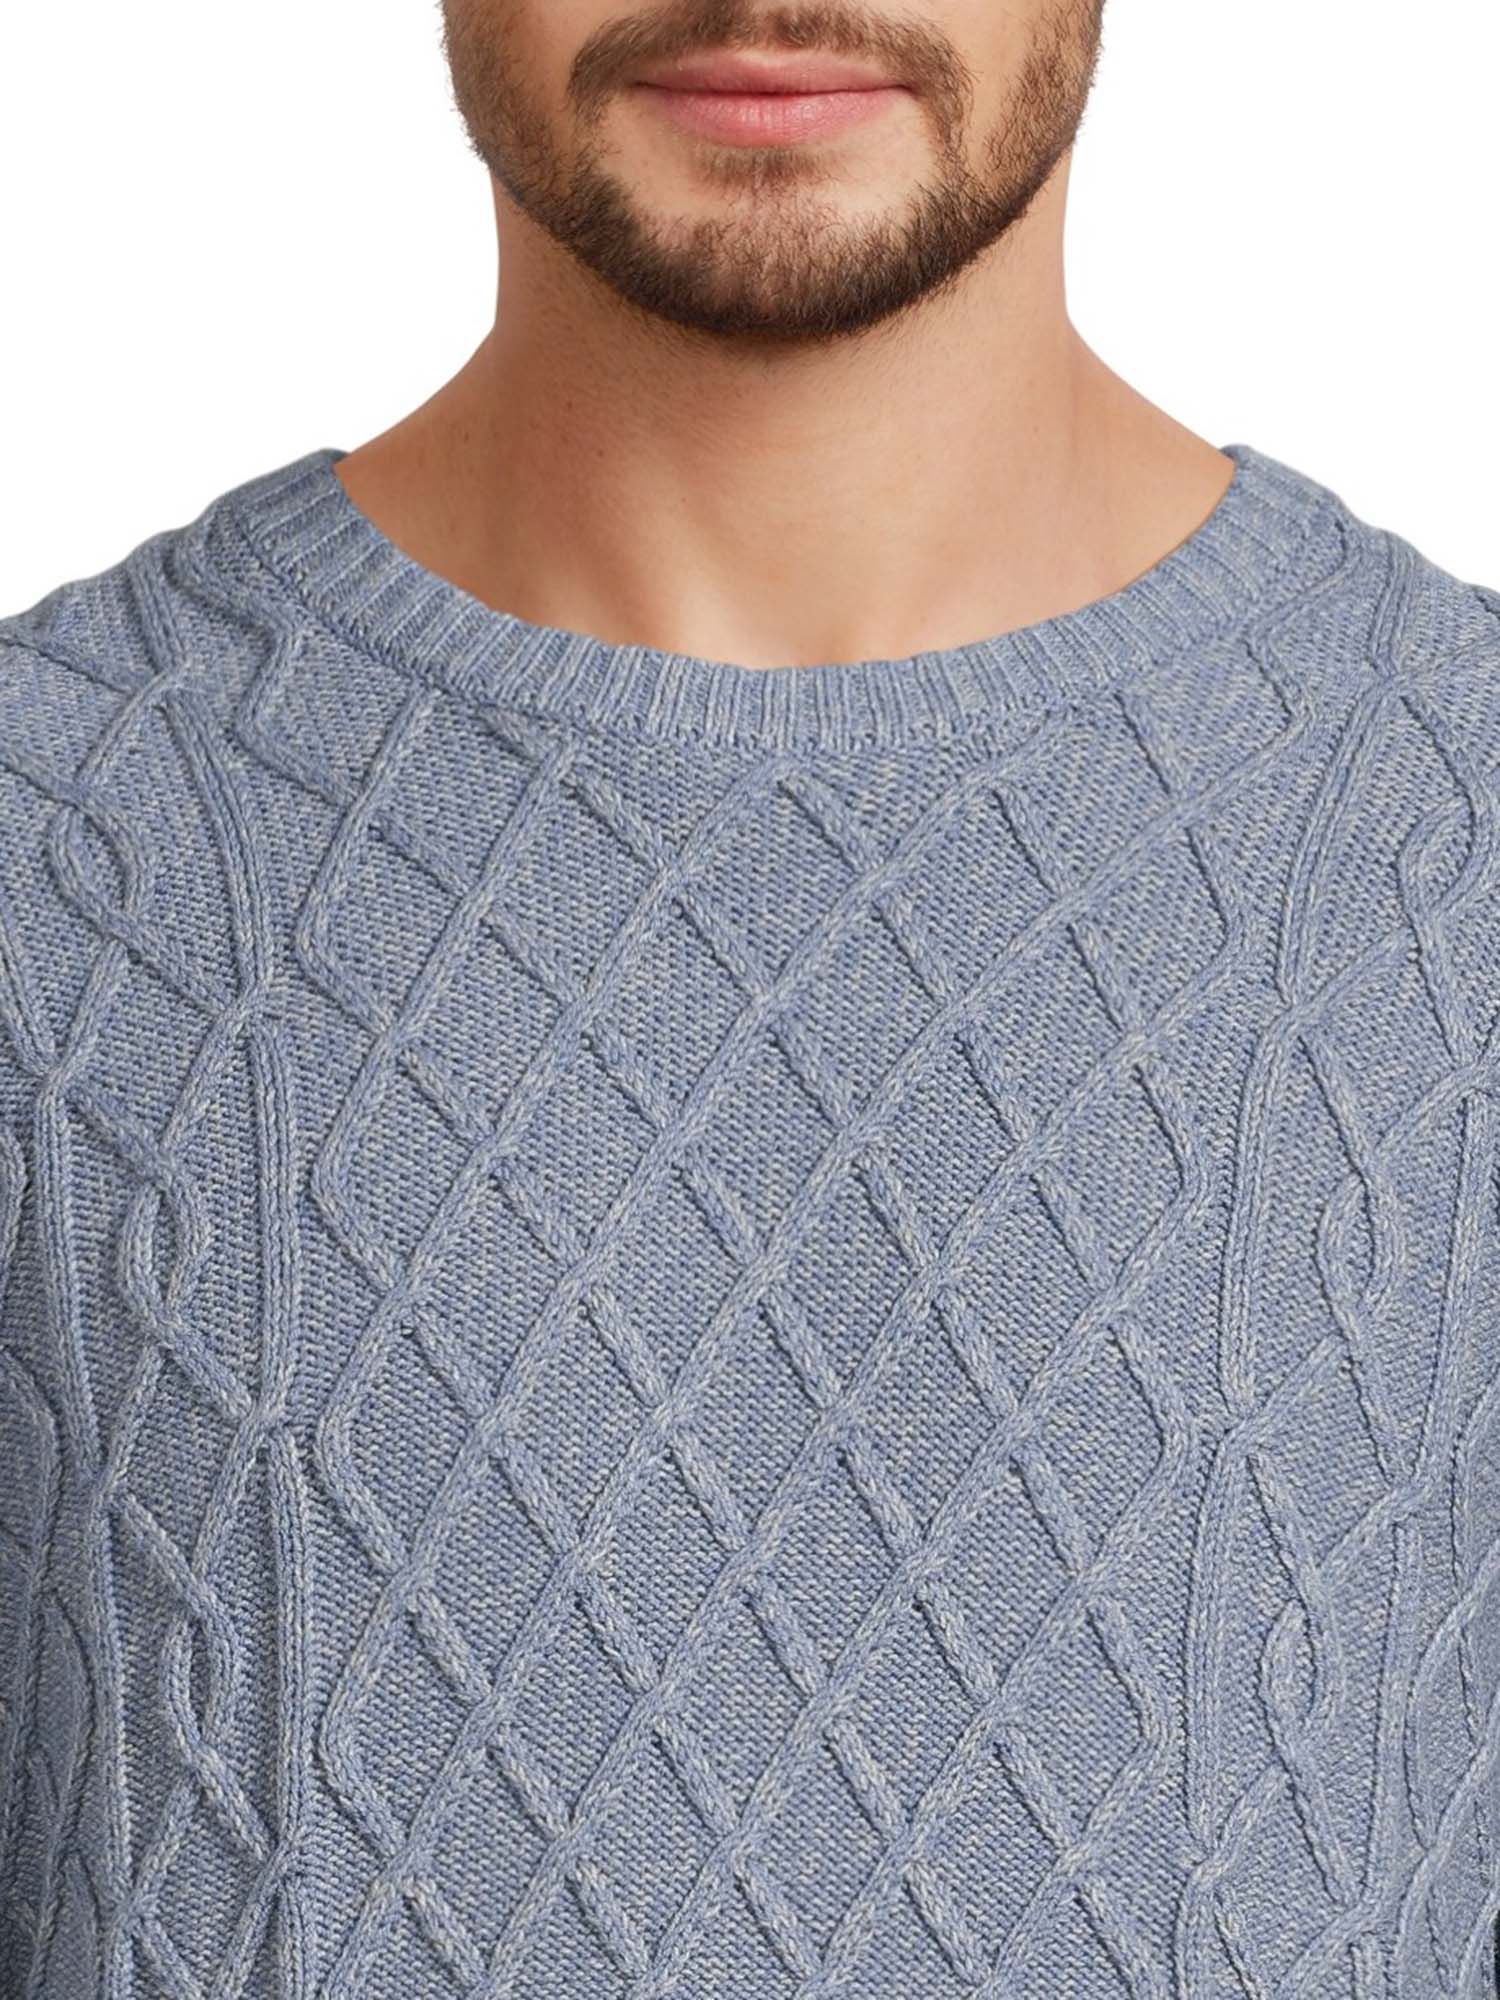 George Men's Marled Sweater with Long Sleeves, Sizes S-3XL - image 4 of 5